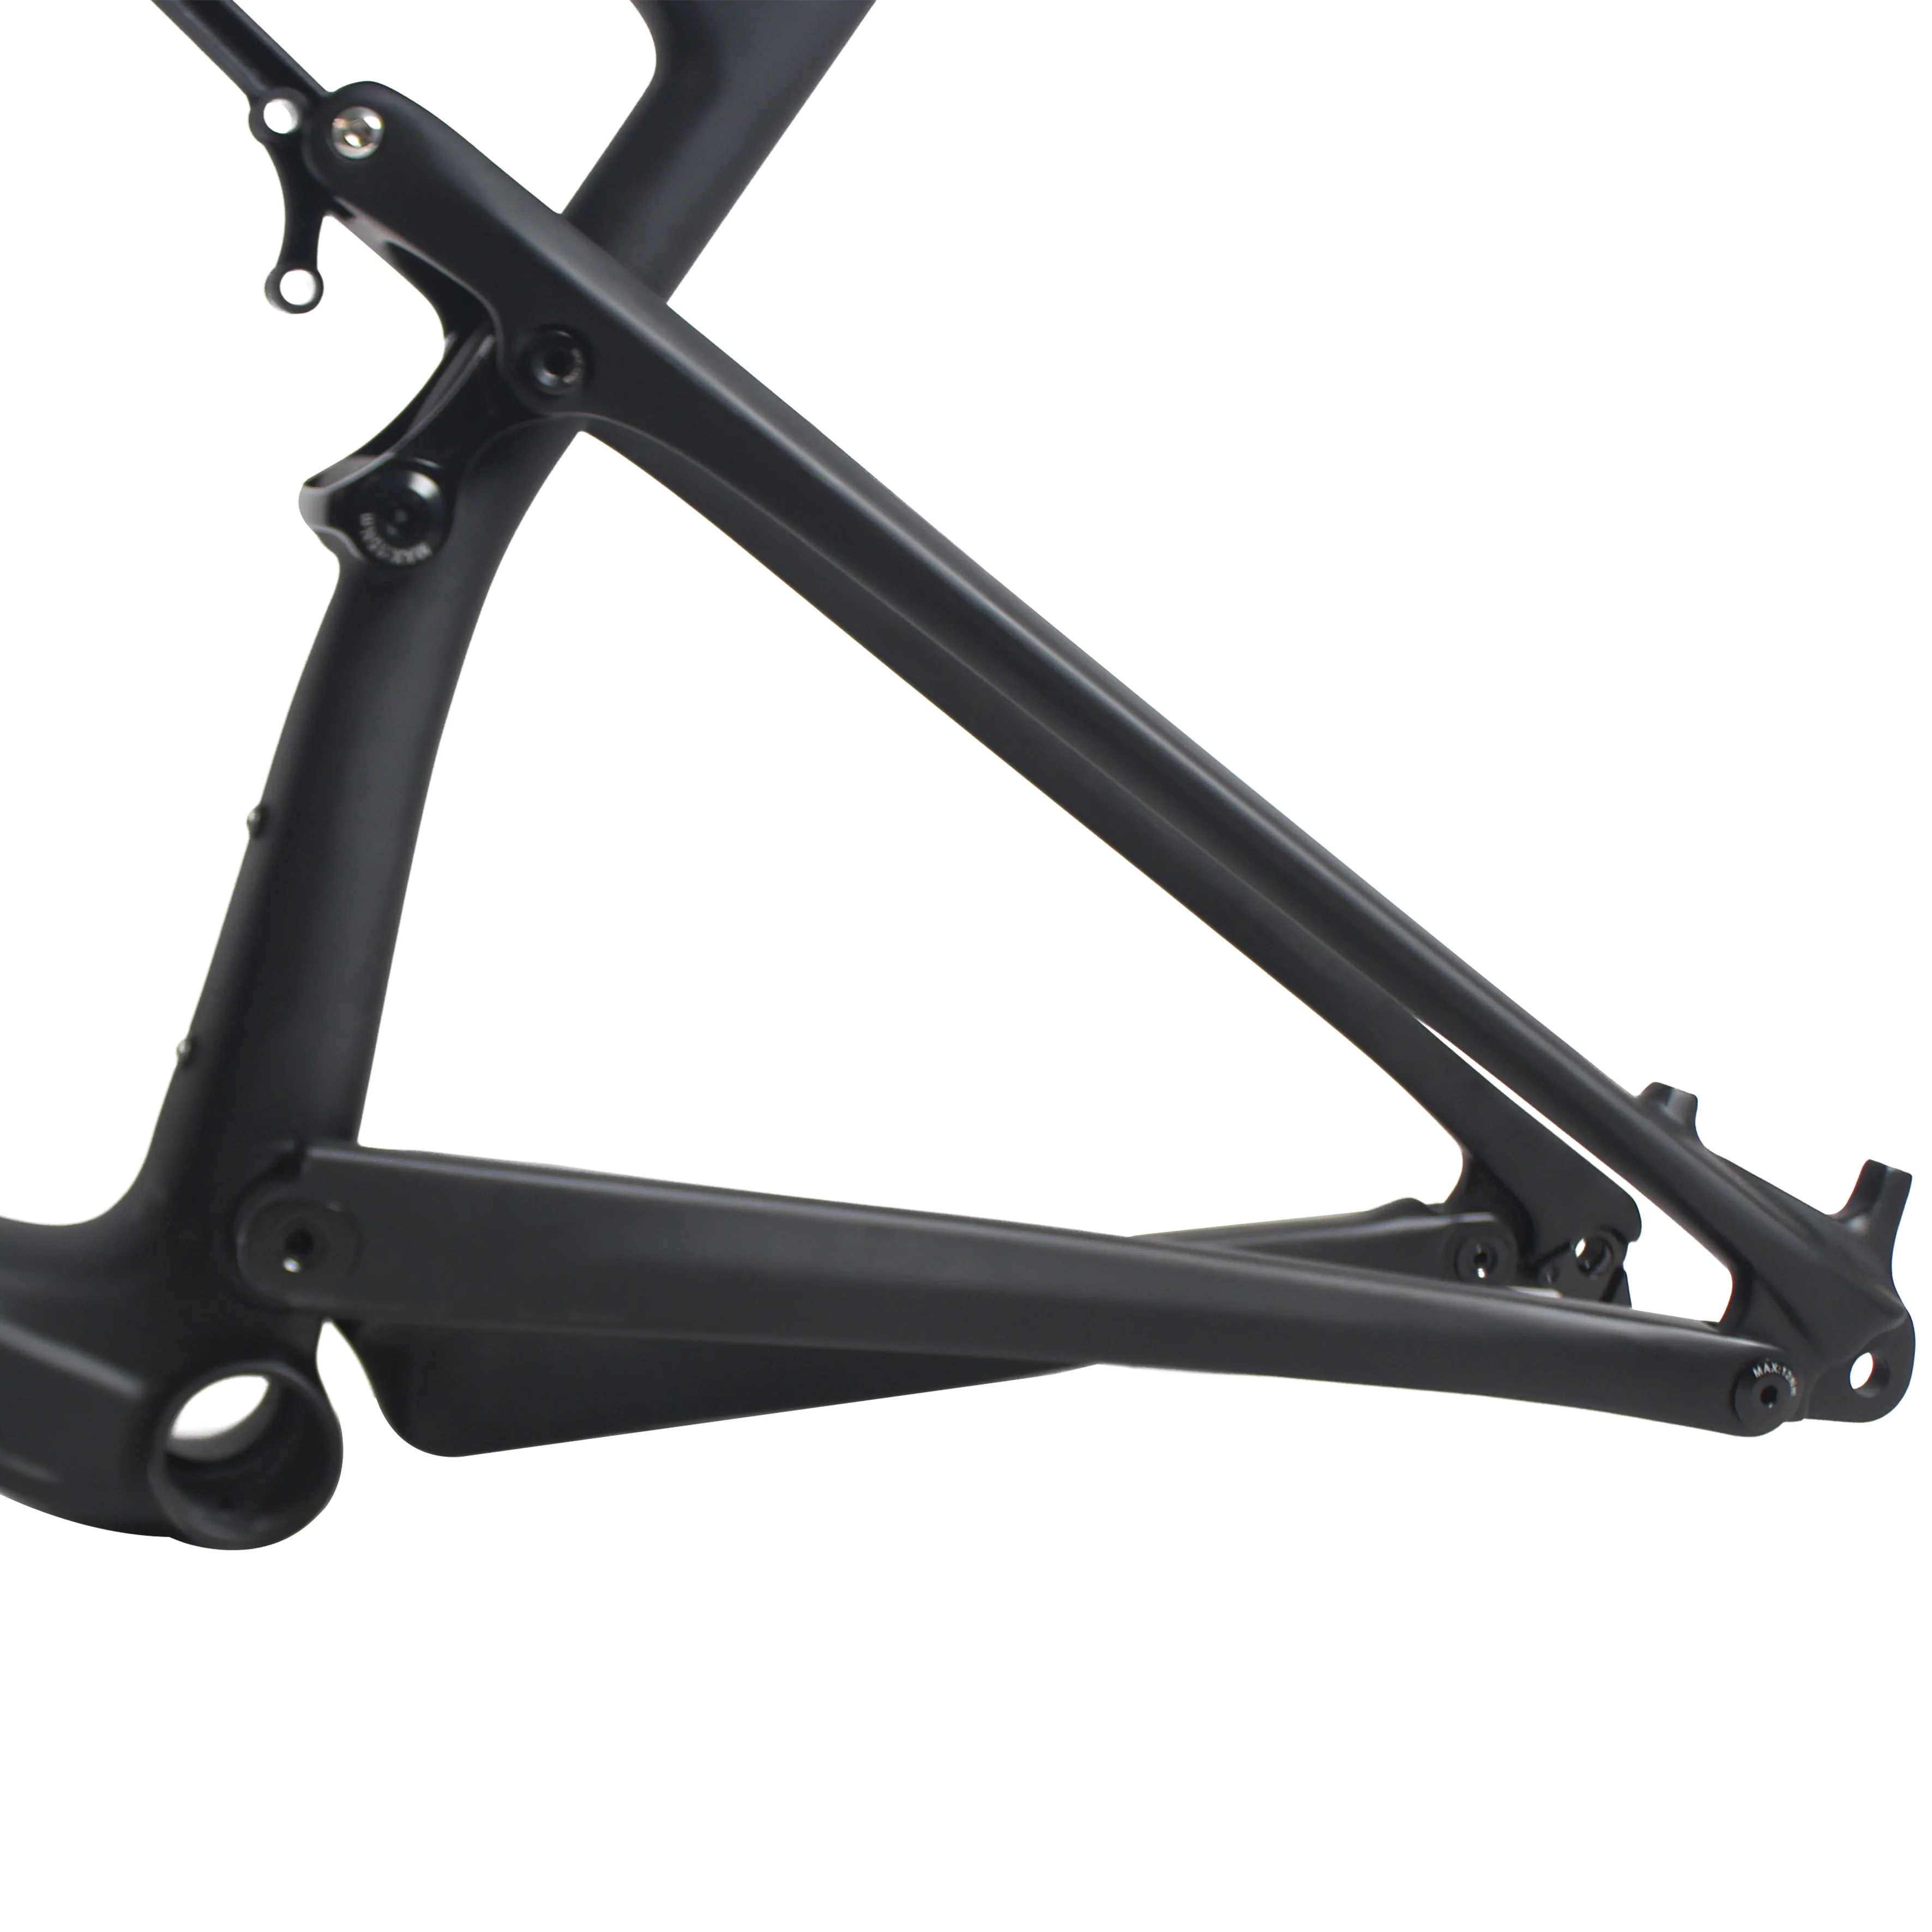 Clearance Full Suspension Carbon Mountain Bike Frame in Shock 190*51mm travel 100mm  15.5/17.5/19/21inch size 8